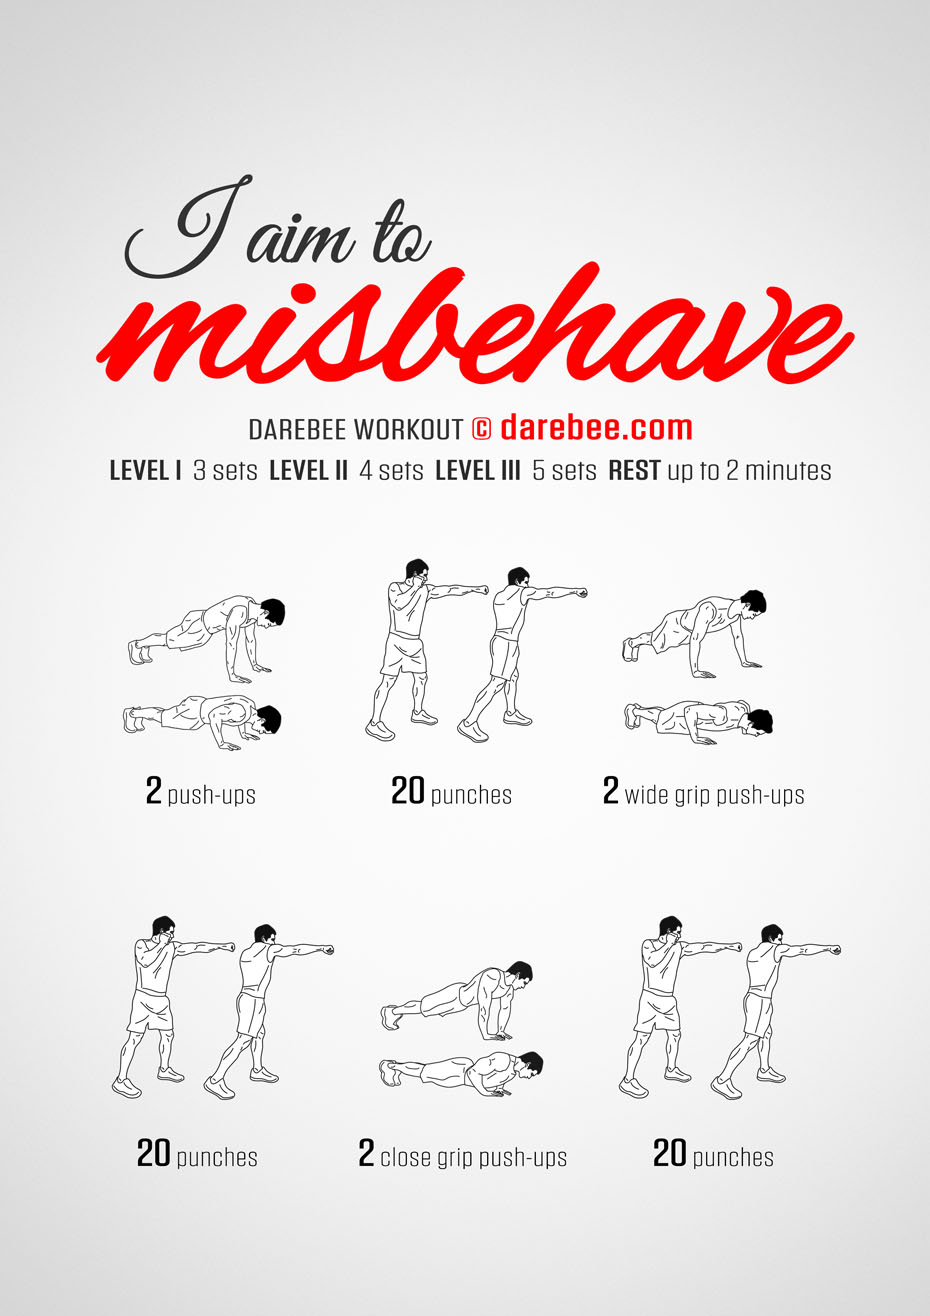 I Aim To Misbehave is a DAREBEE home fitness, no-equipment workout that will take your endurance and cardiovascular fitness to new heights.